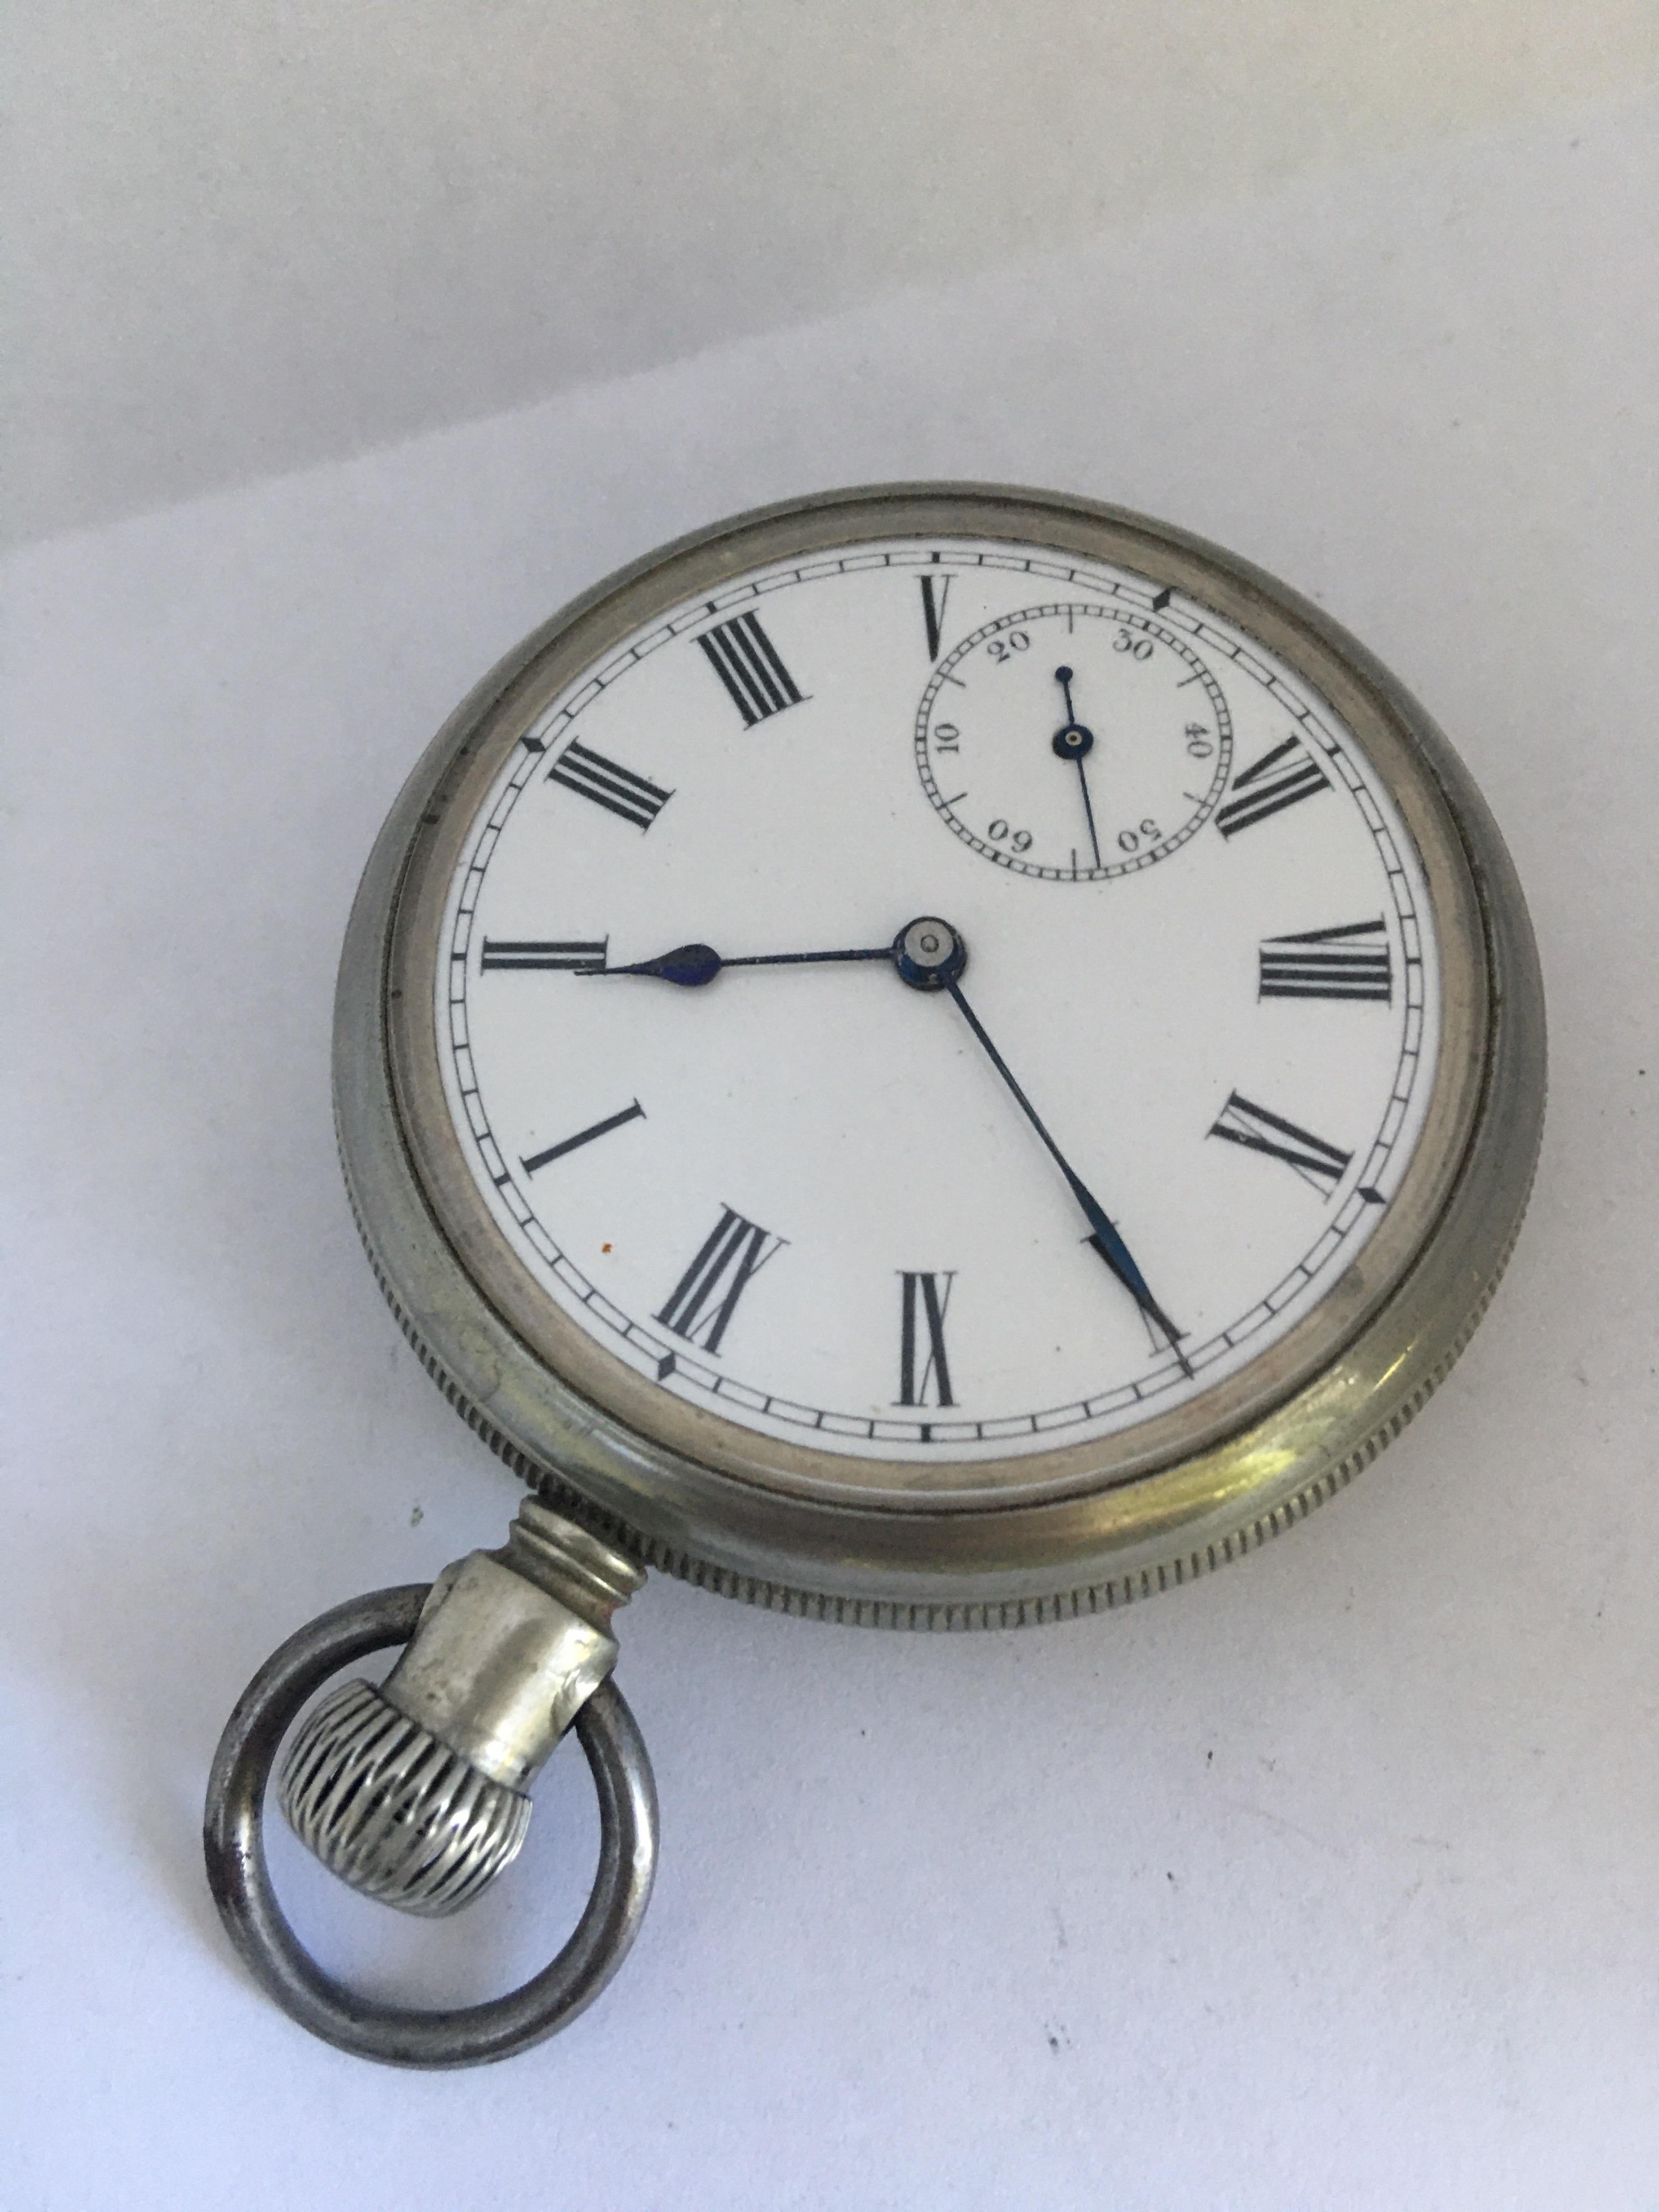 This pre-owned 51mm diameter antique hand winding pocket watch is in good working condition and it is ticking well. Visible signs of ageing and gentle used with light scratches on the watch case. Some tarnished on the loop or metal ring as